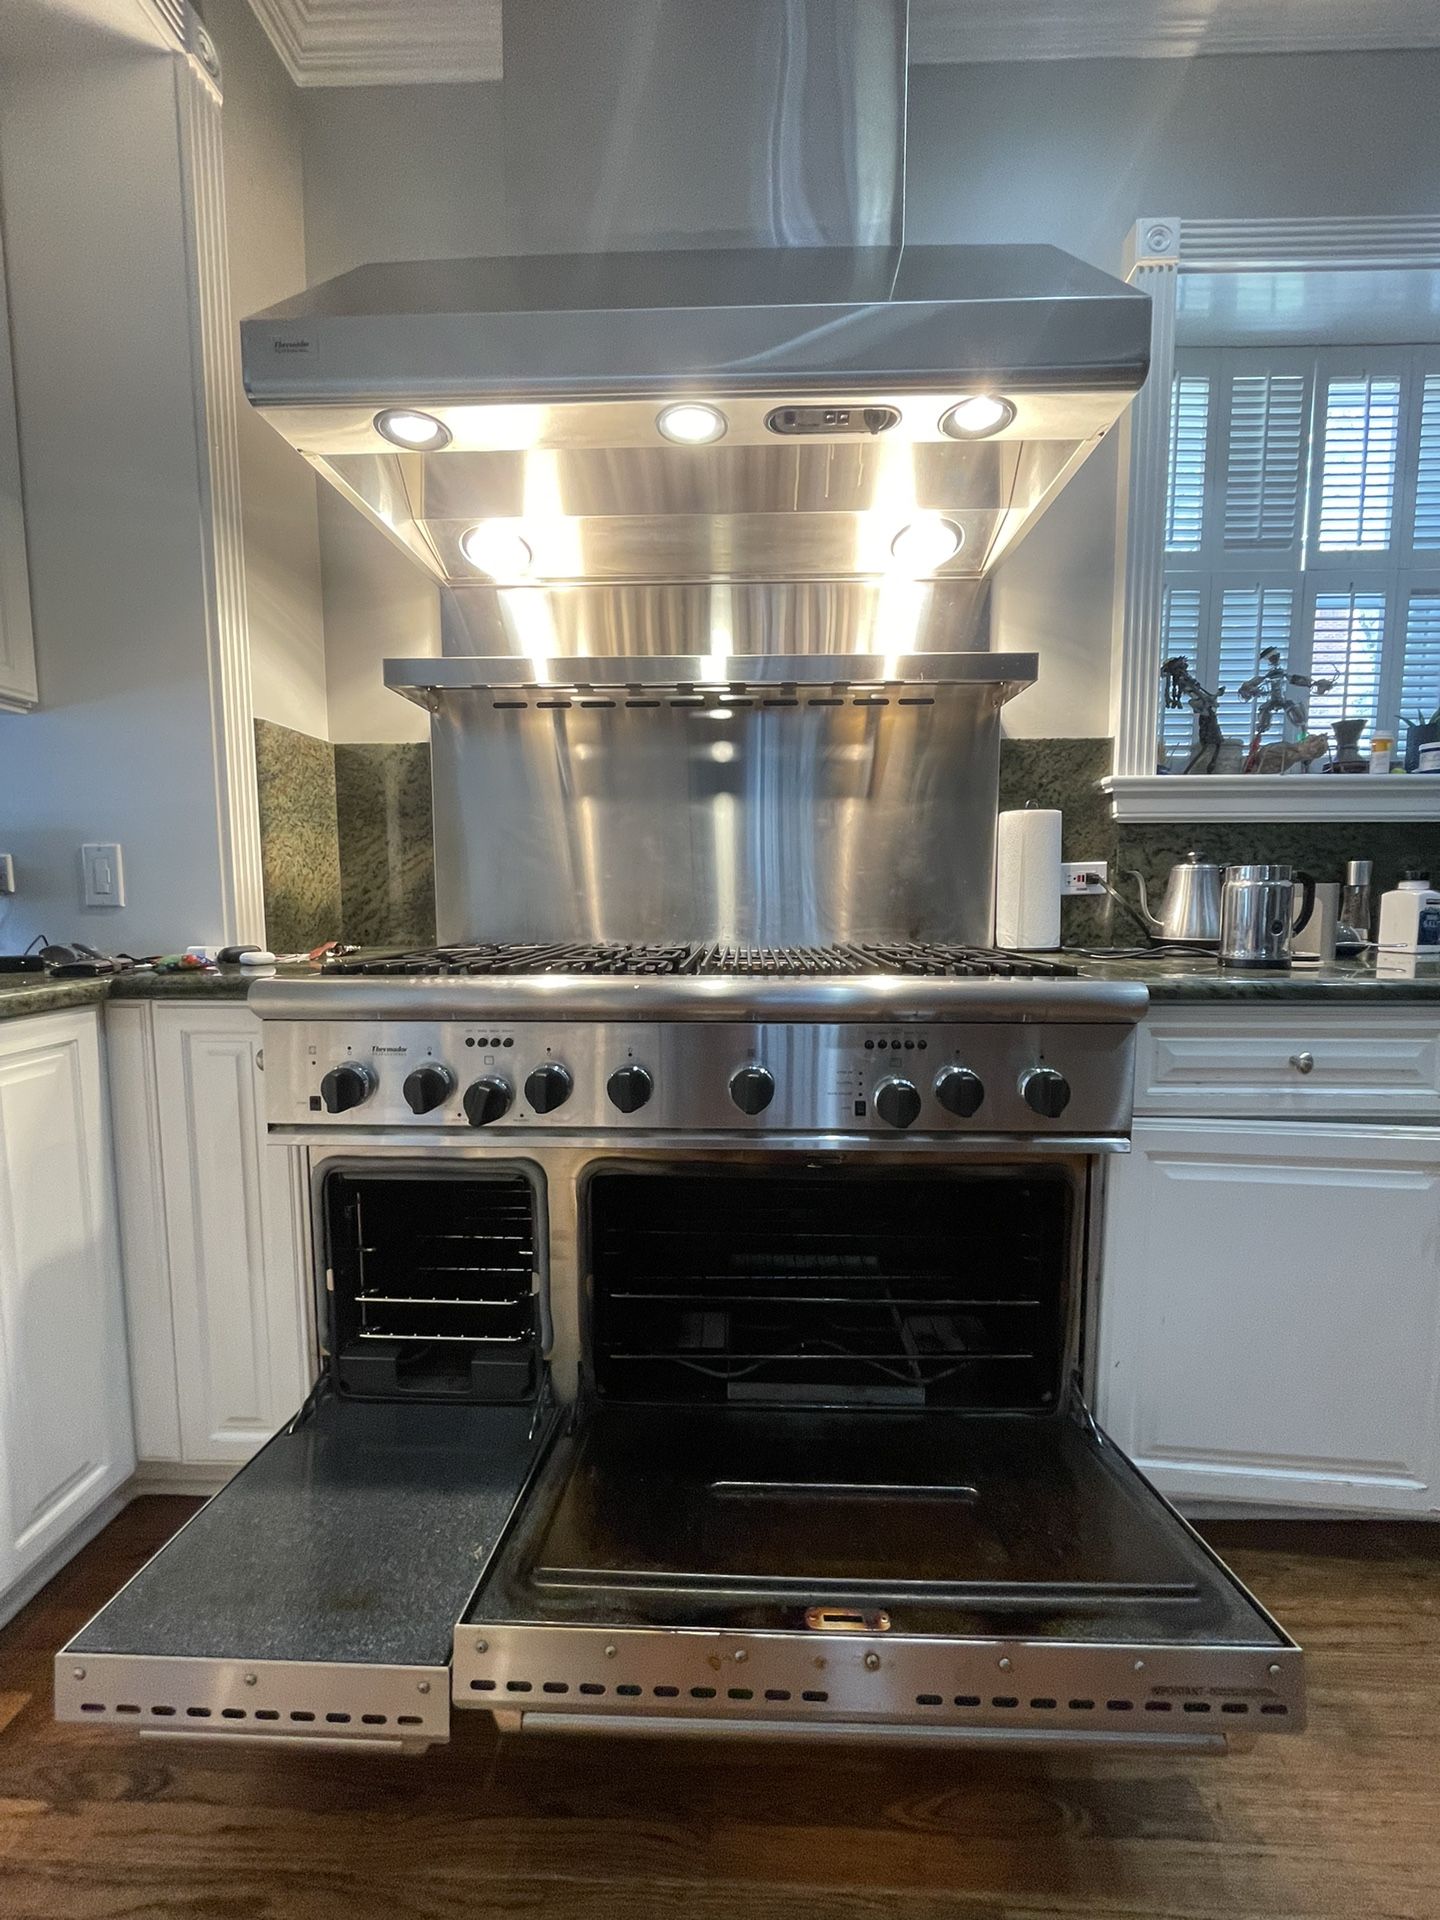 Thermador Professional Range Oven and Hood - $2,000 OBO